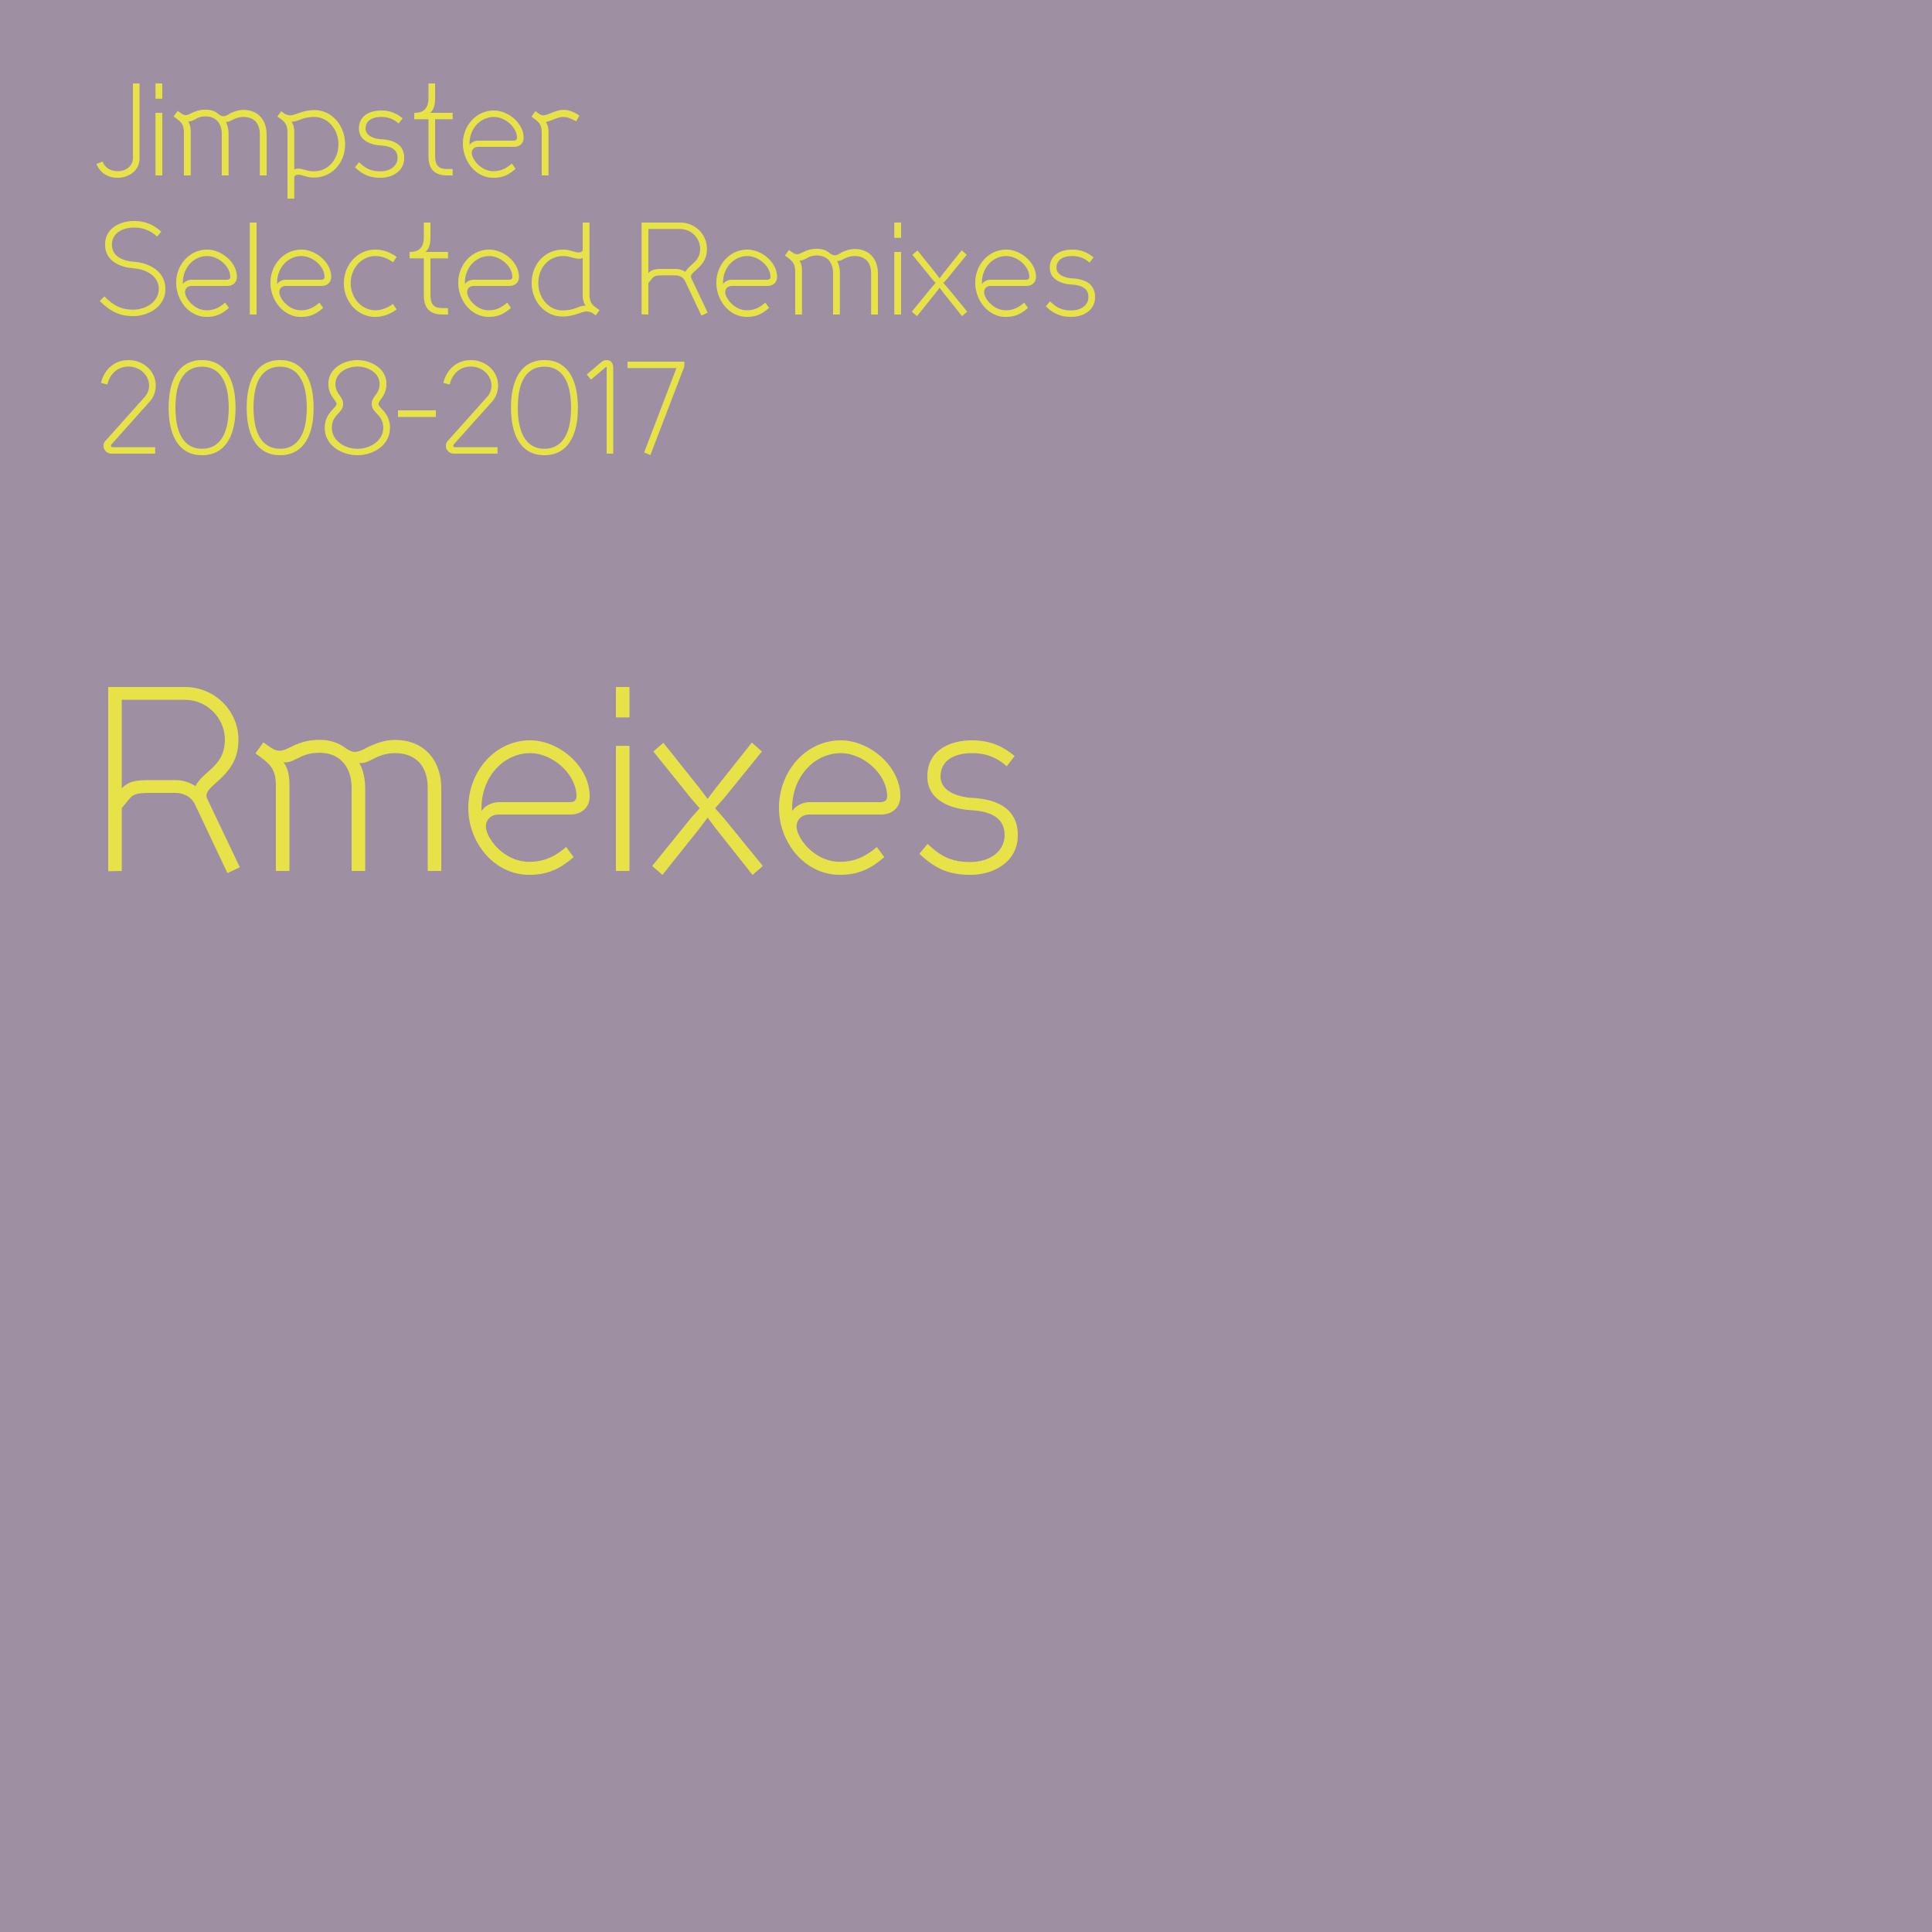 She's All Right (Jimpster Remix)